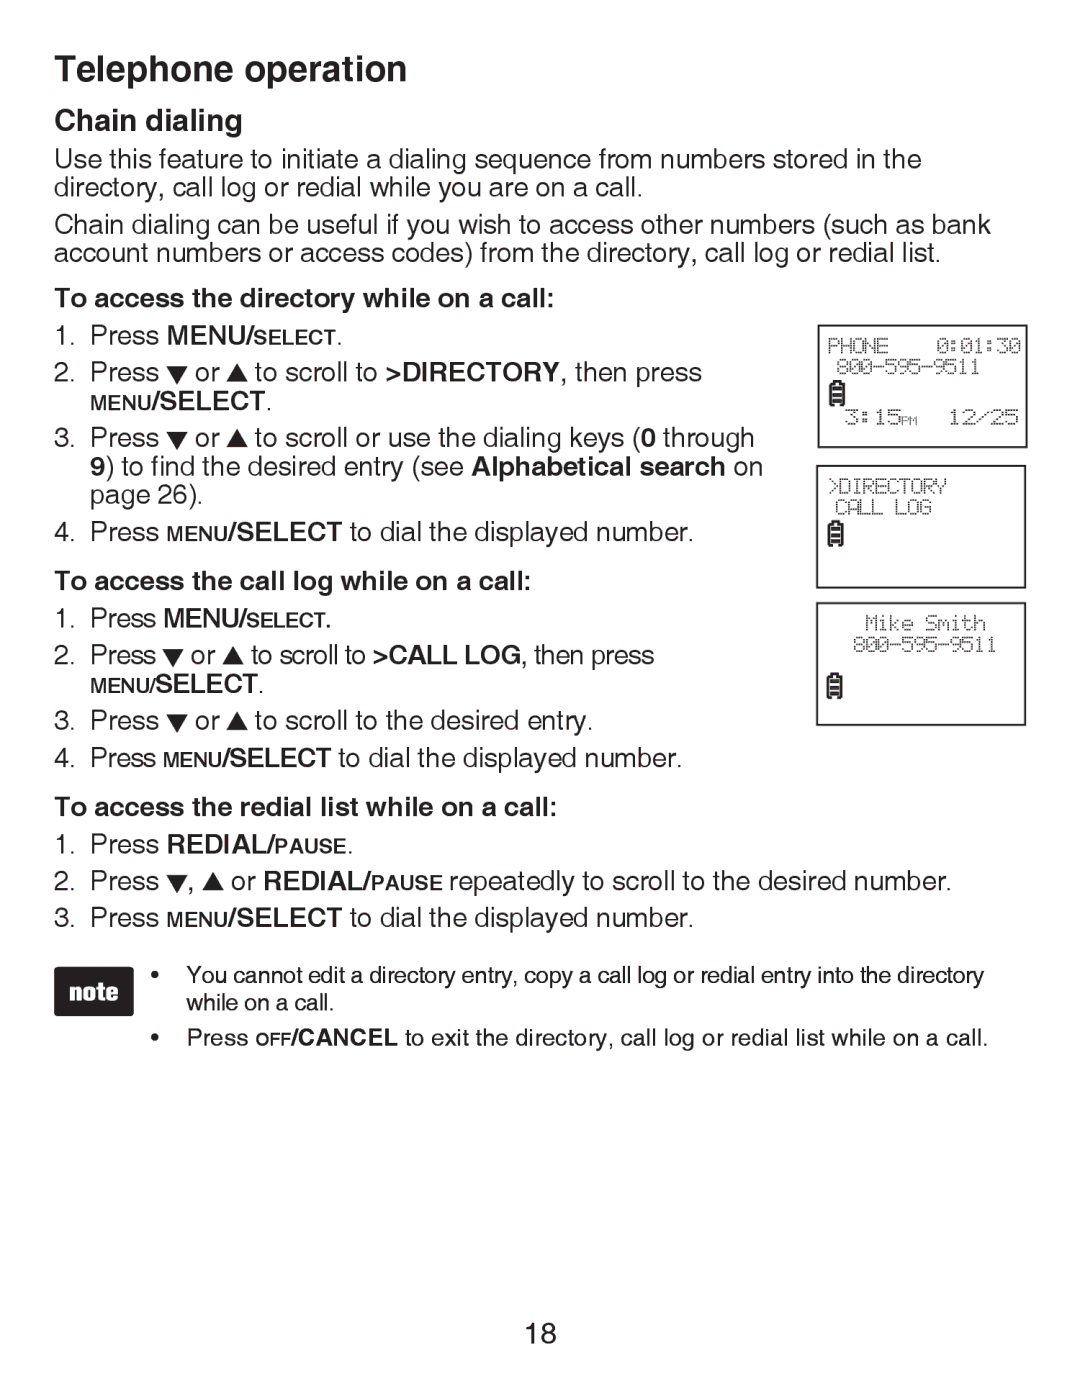 VTech CS6419-2 user manual Chain dialing, To access the directory while on a call, To access the call log while on a call 